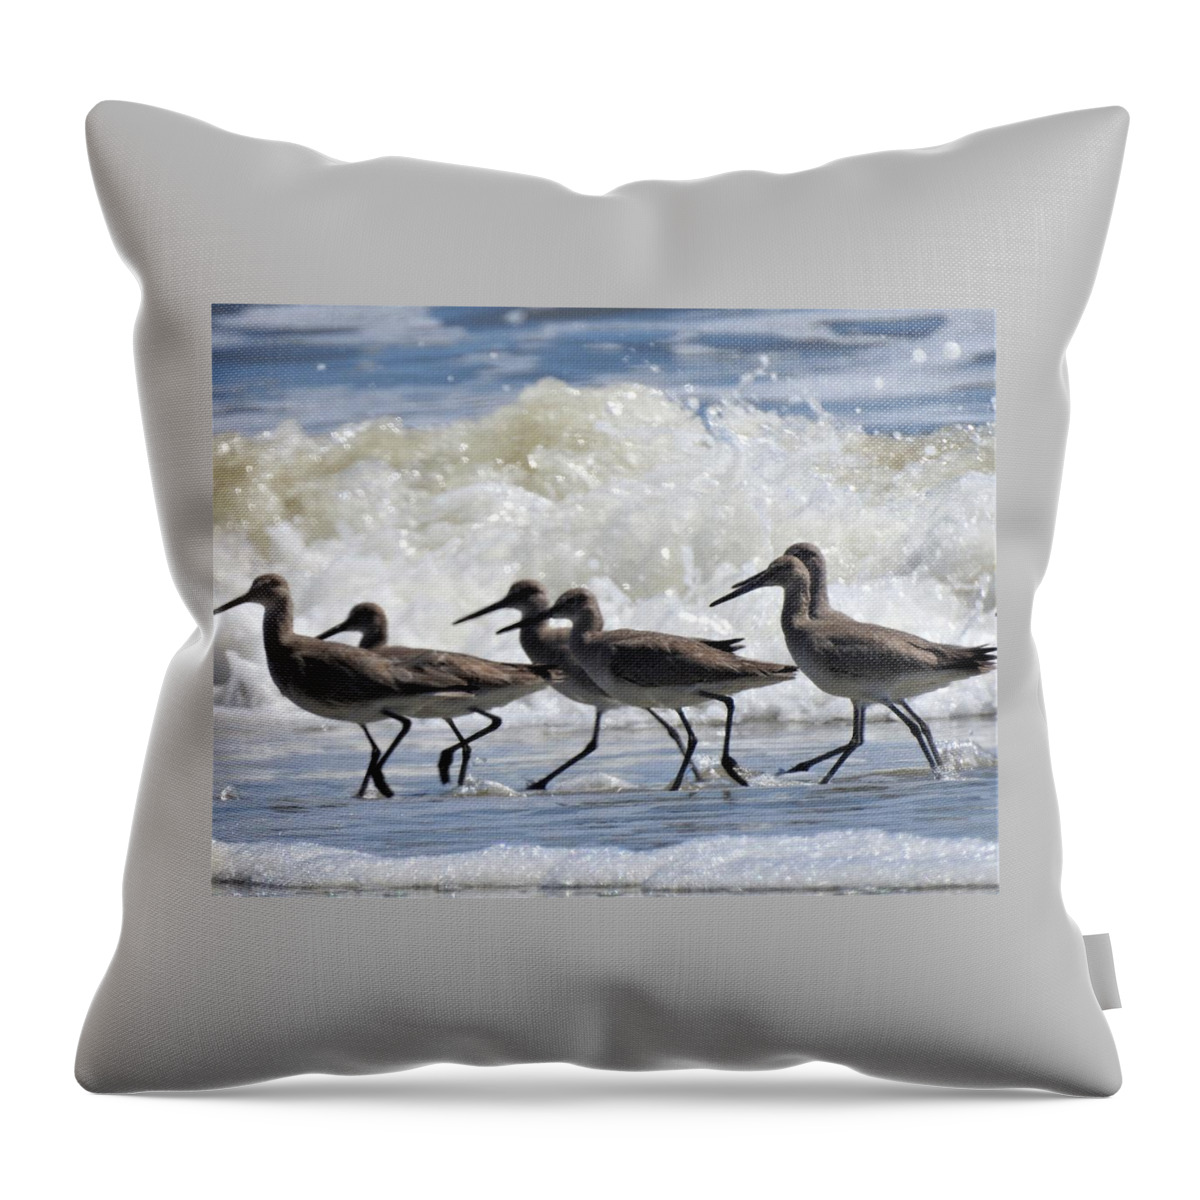 Coastal Throw Pillow featuring the photograph Coastal Togetherness by Jan Gelders